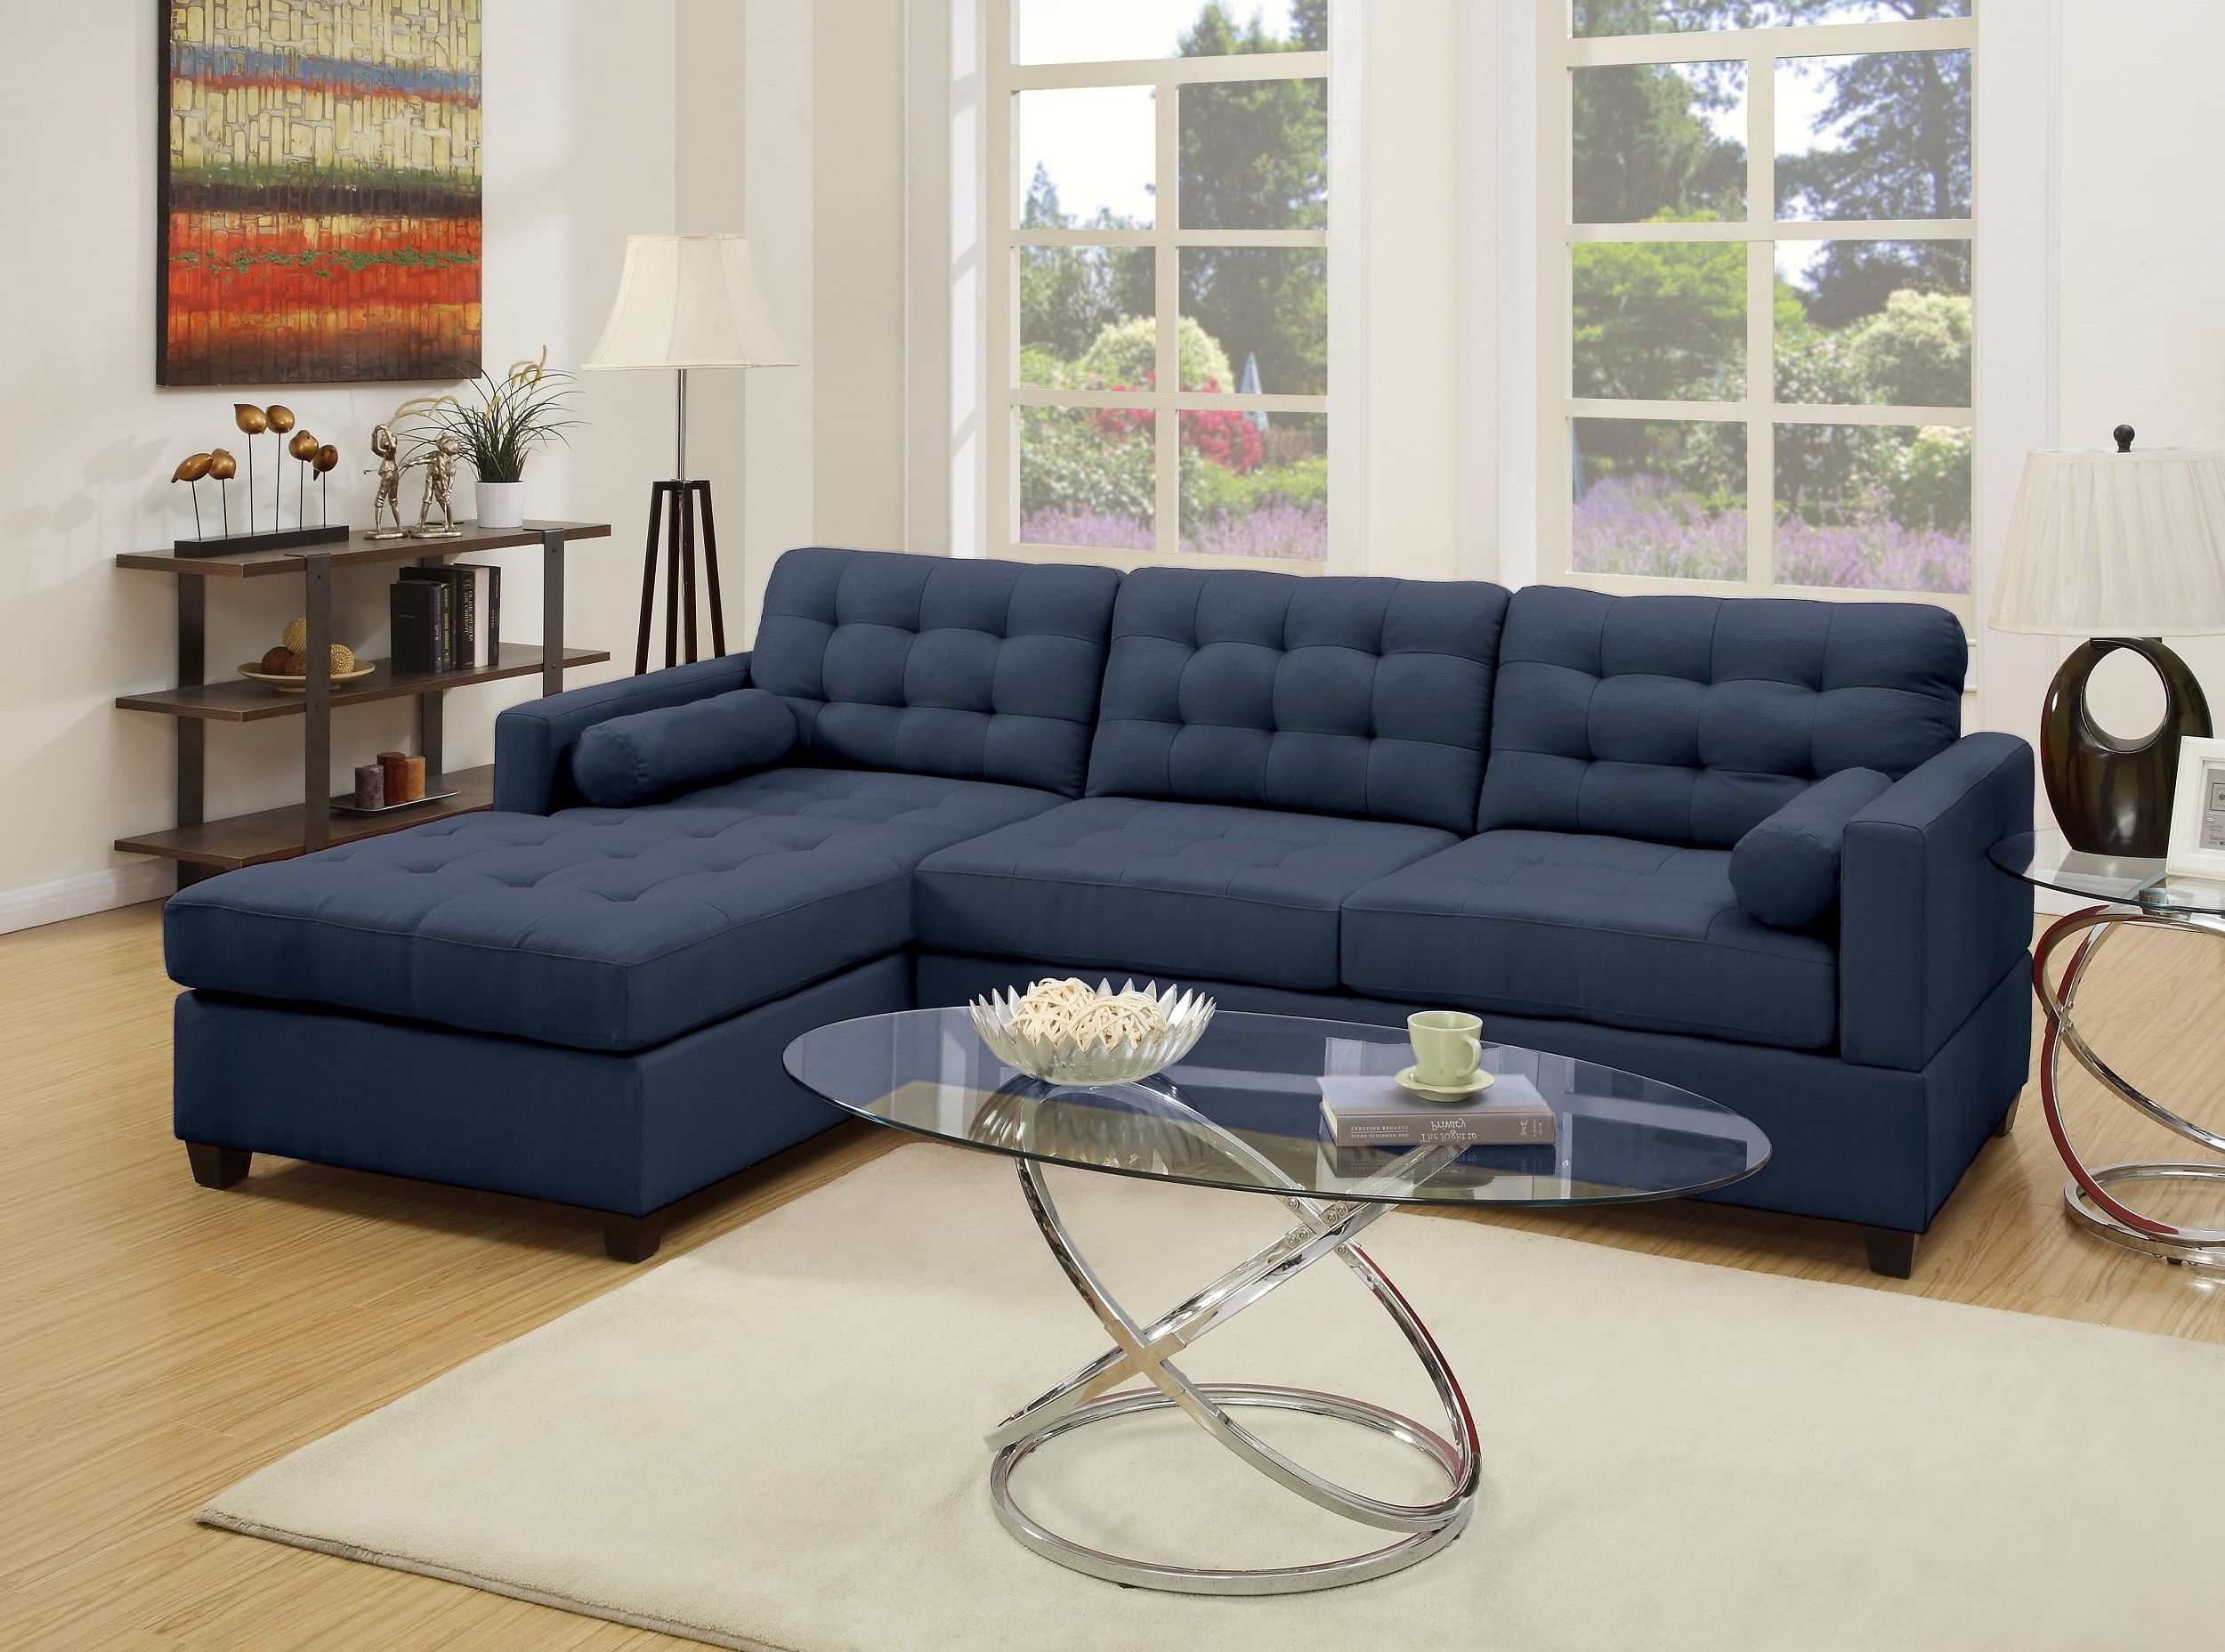 Reversible Sectional Sofas Intended For Most Current Living Room Furniture Reversible Sectional Sofa Set Dark Blue Polyfiber (View 11 of 15)